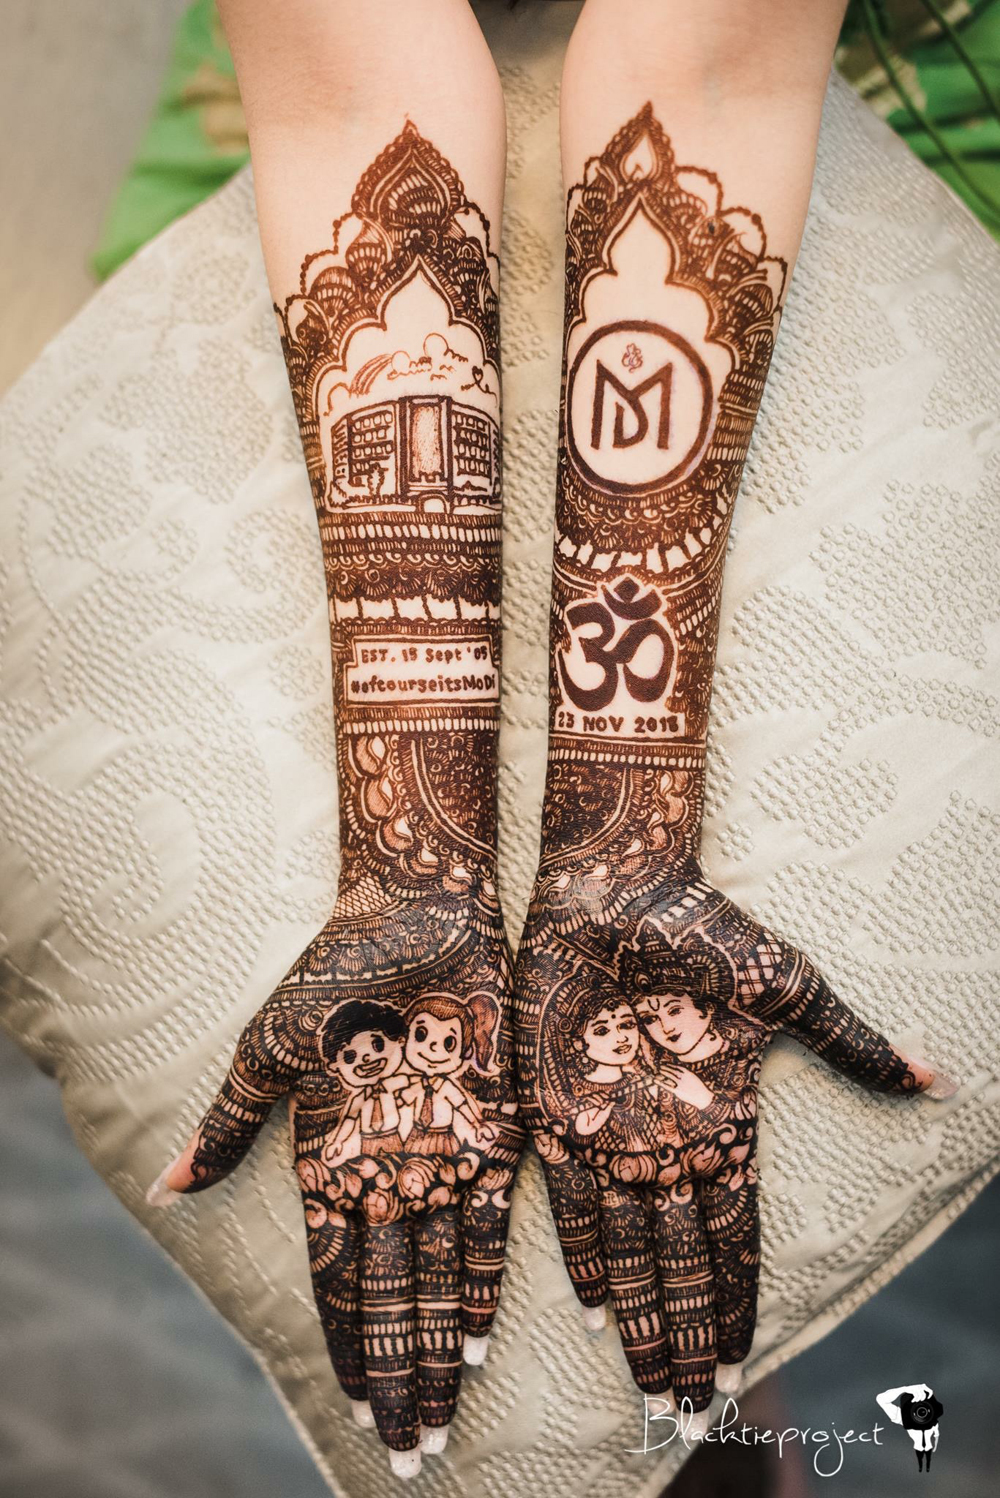 Which Mehndi artist provides the best bridal mehndi services? - Quora